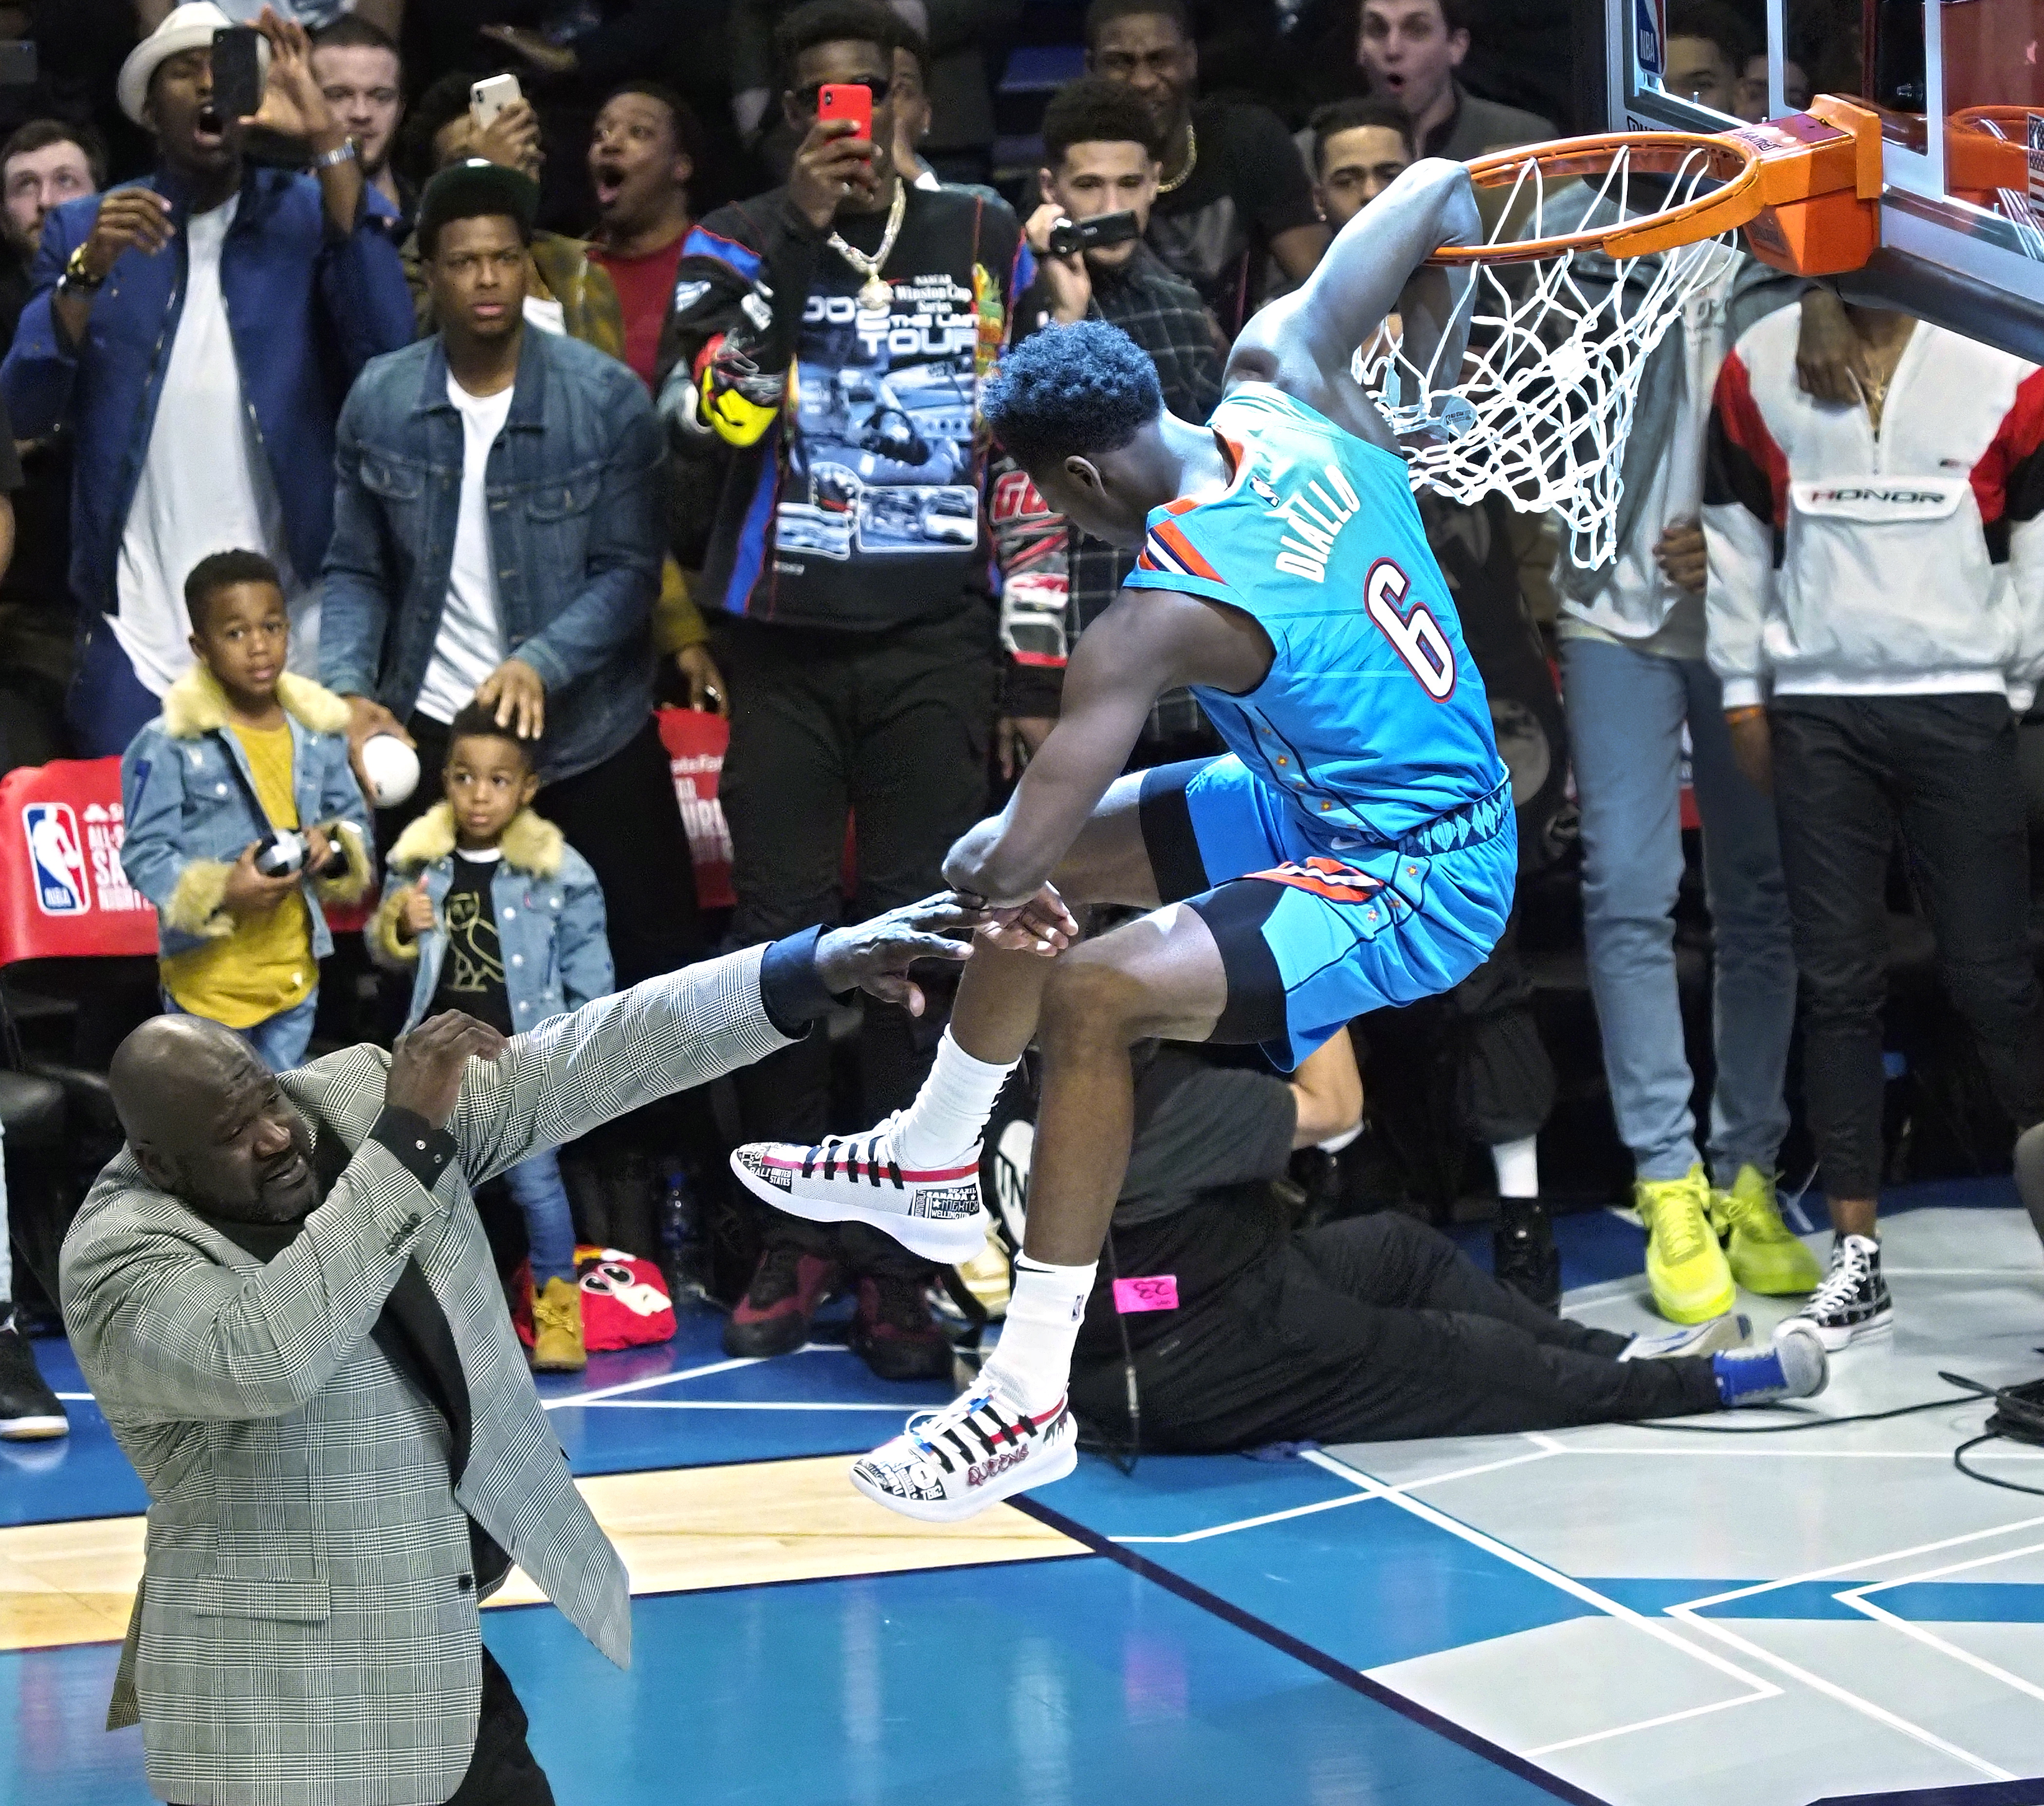 epa07376408 Oklahoma City player Hamidou Diallo (R) dunks the ball over the top of Shaquille O'Neal (L) in the Slam Dunk Contest during the All-Star Saturday Night on All Star Weekend at the Spectrum Center in Charlotte, North Carolina, USA, 16 February 2019.  EPA/JOHN G MABANGLO SHUTTERSTOCK OUT SHUTTERSTOCK OUT